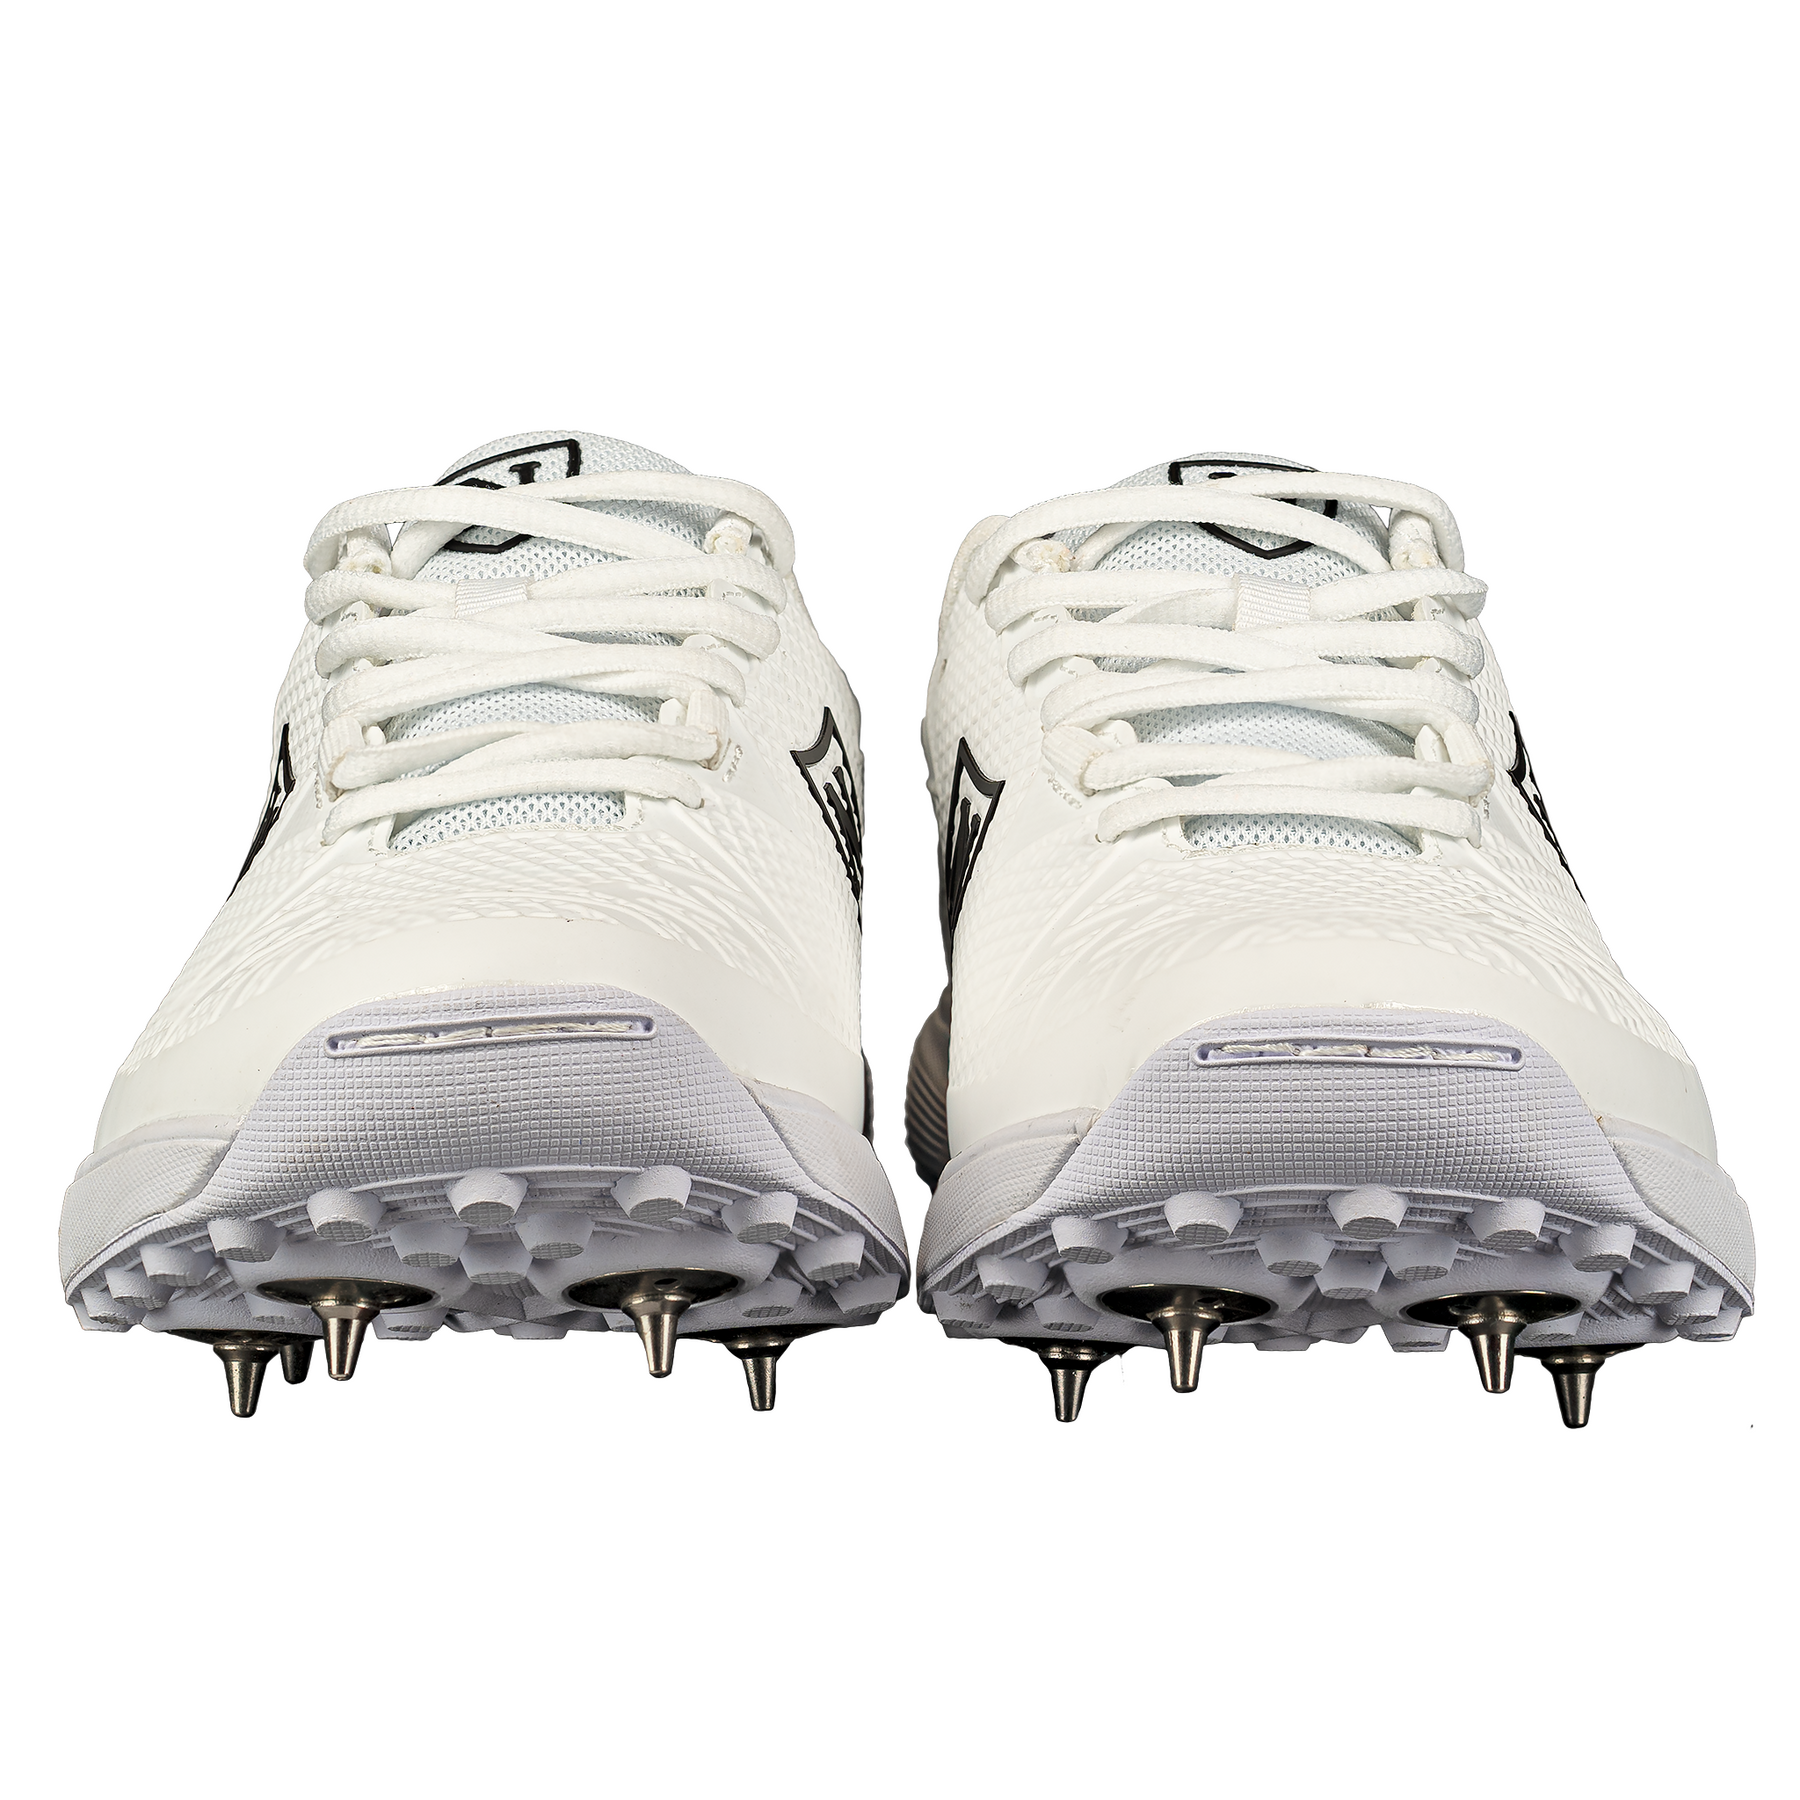 Newbery Flexispike All Rounder Cricket Shoes - White